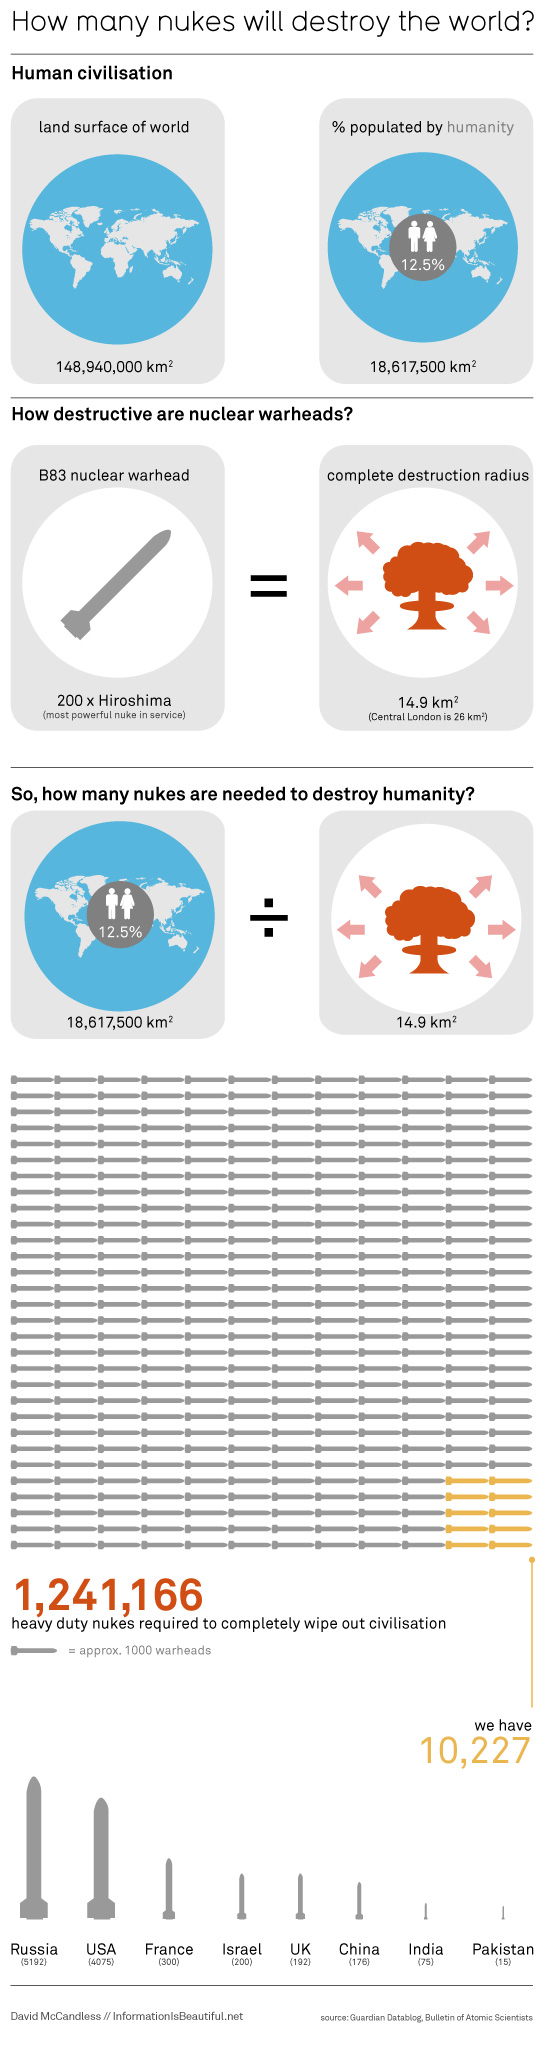 So, how many nukes are needed to destroy humanity?